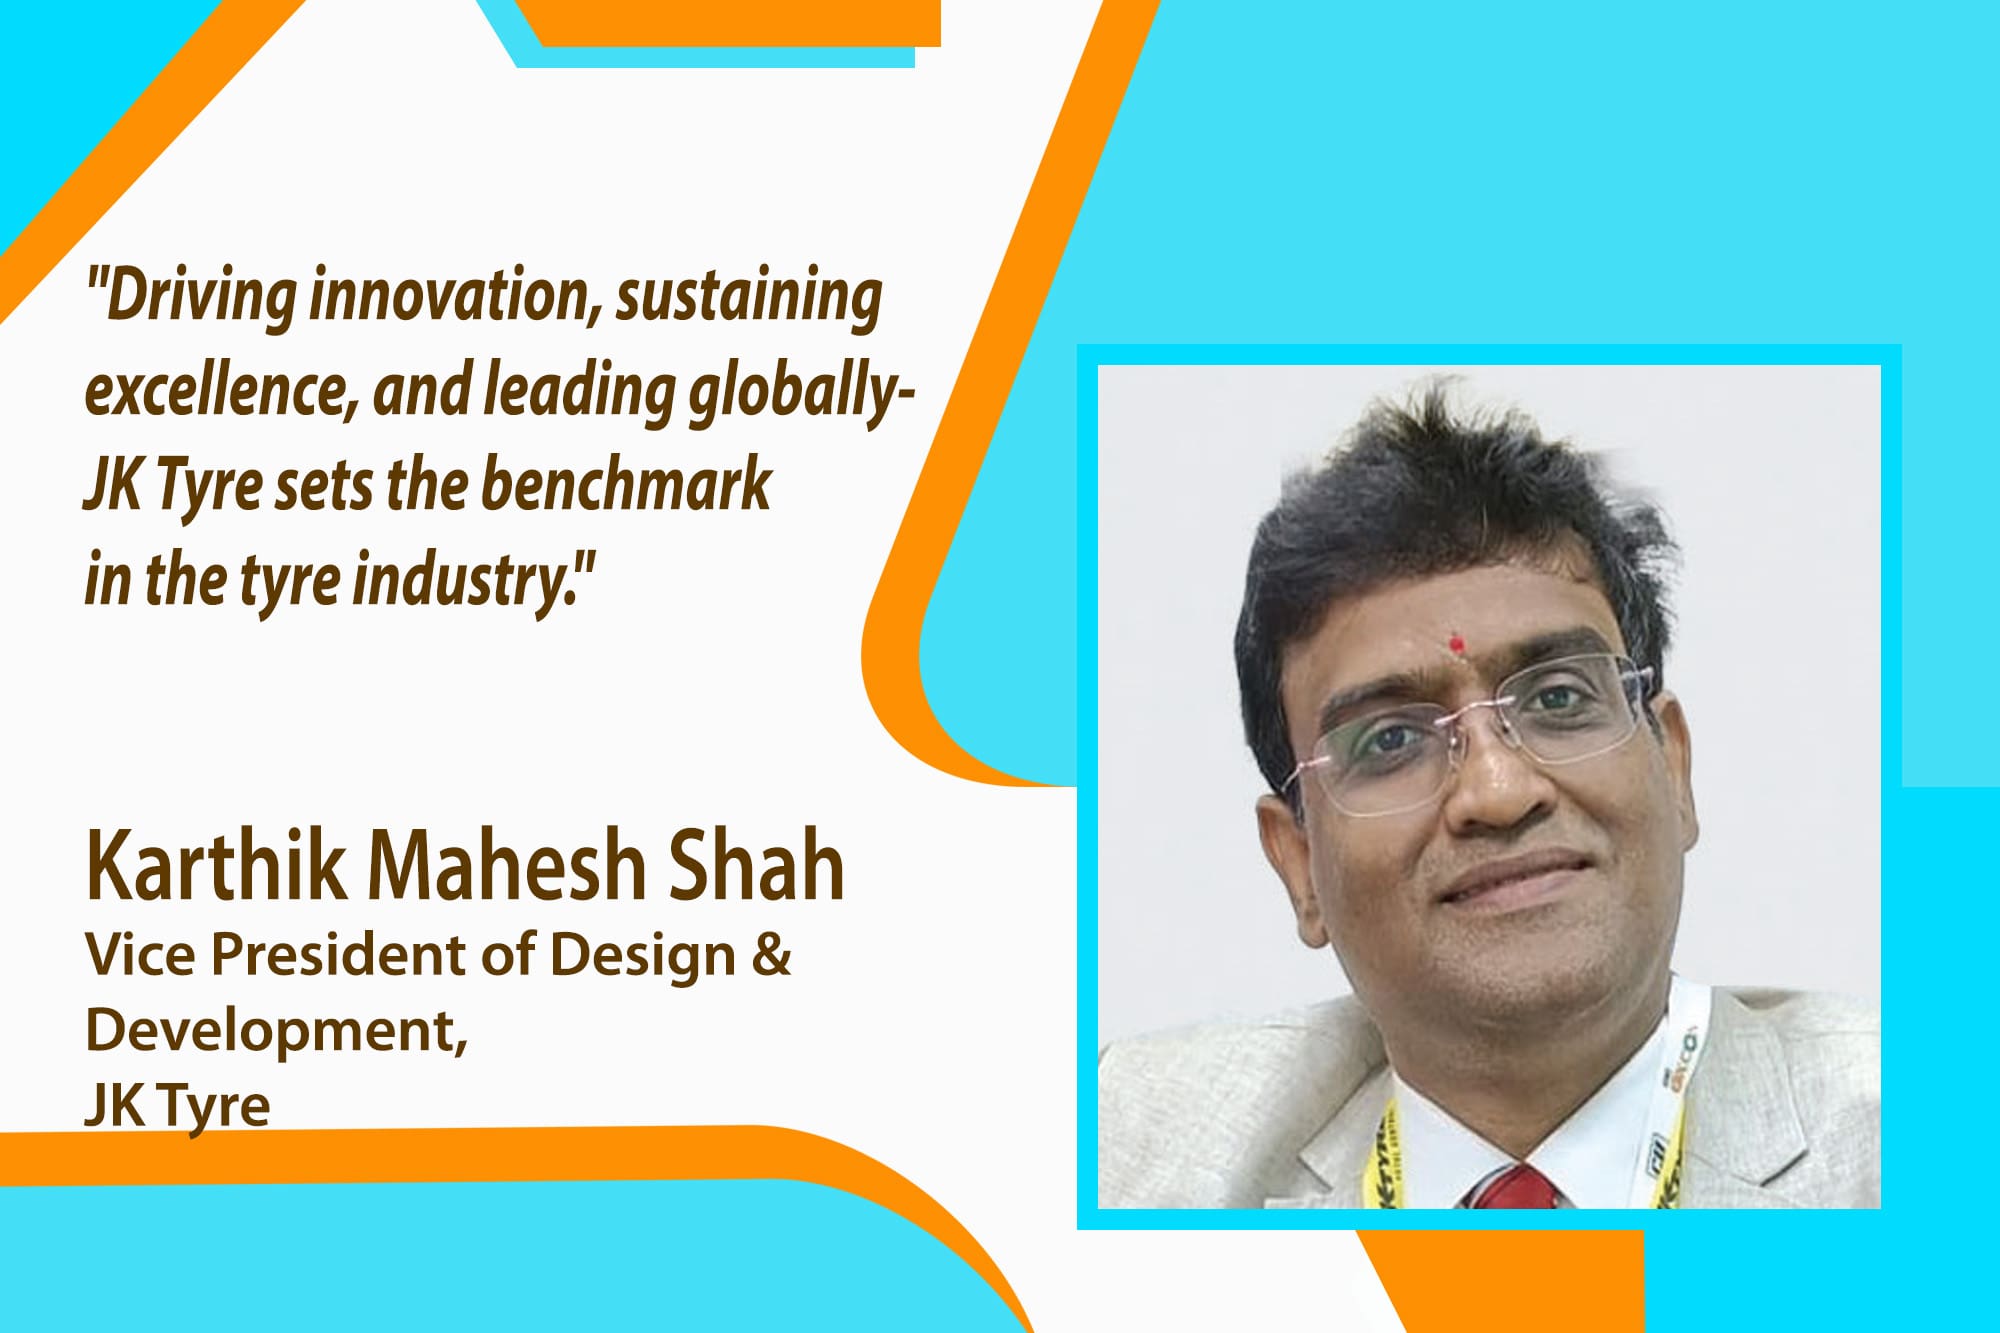 Karthik Mahesh Shah, Vice President of Design & Development at JK Tyre, shares insights into the company's commitment to pushing the boundaries of technology and meeting the dynamic needs of the industry.